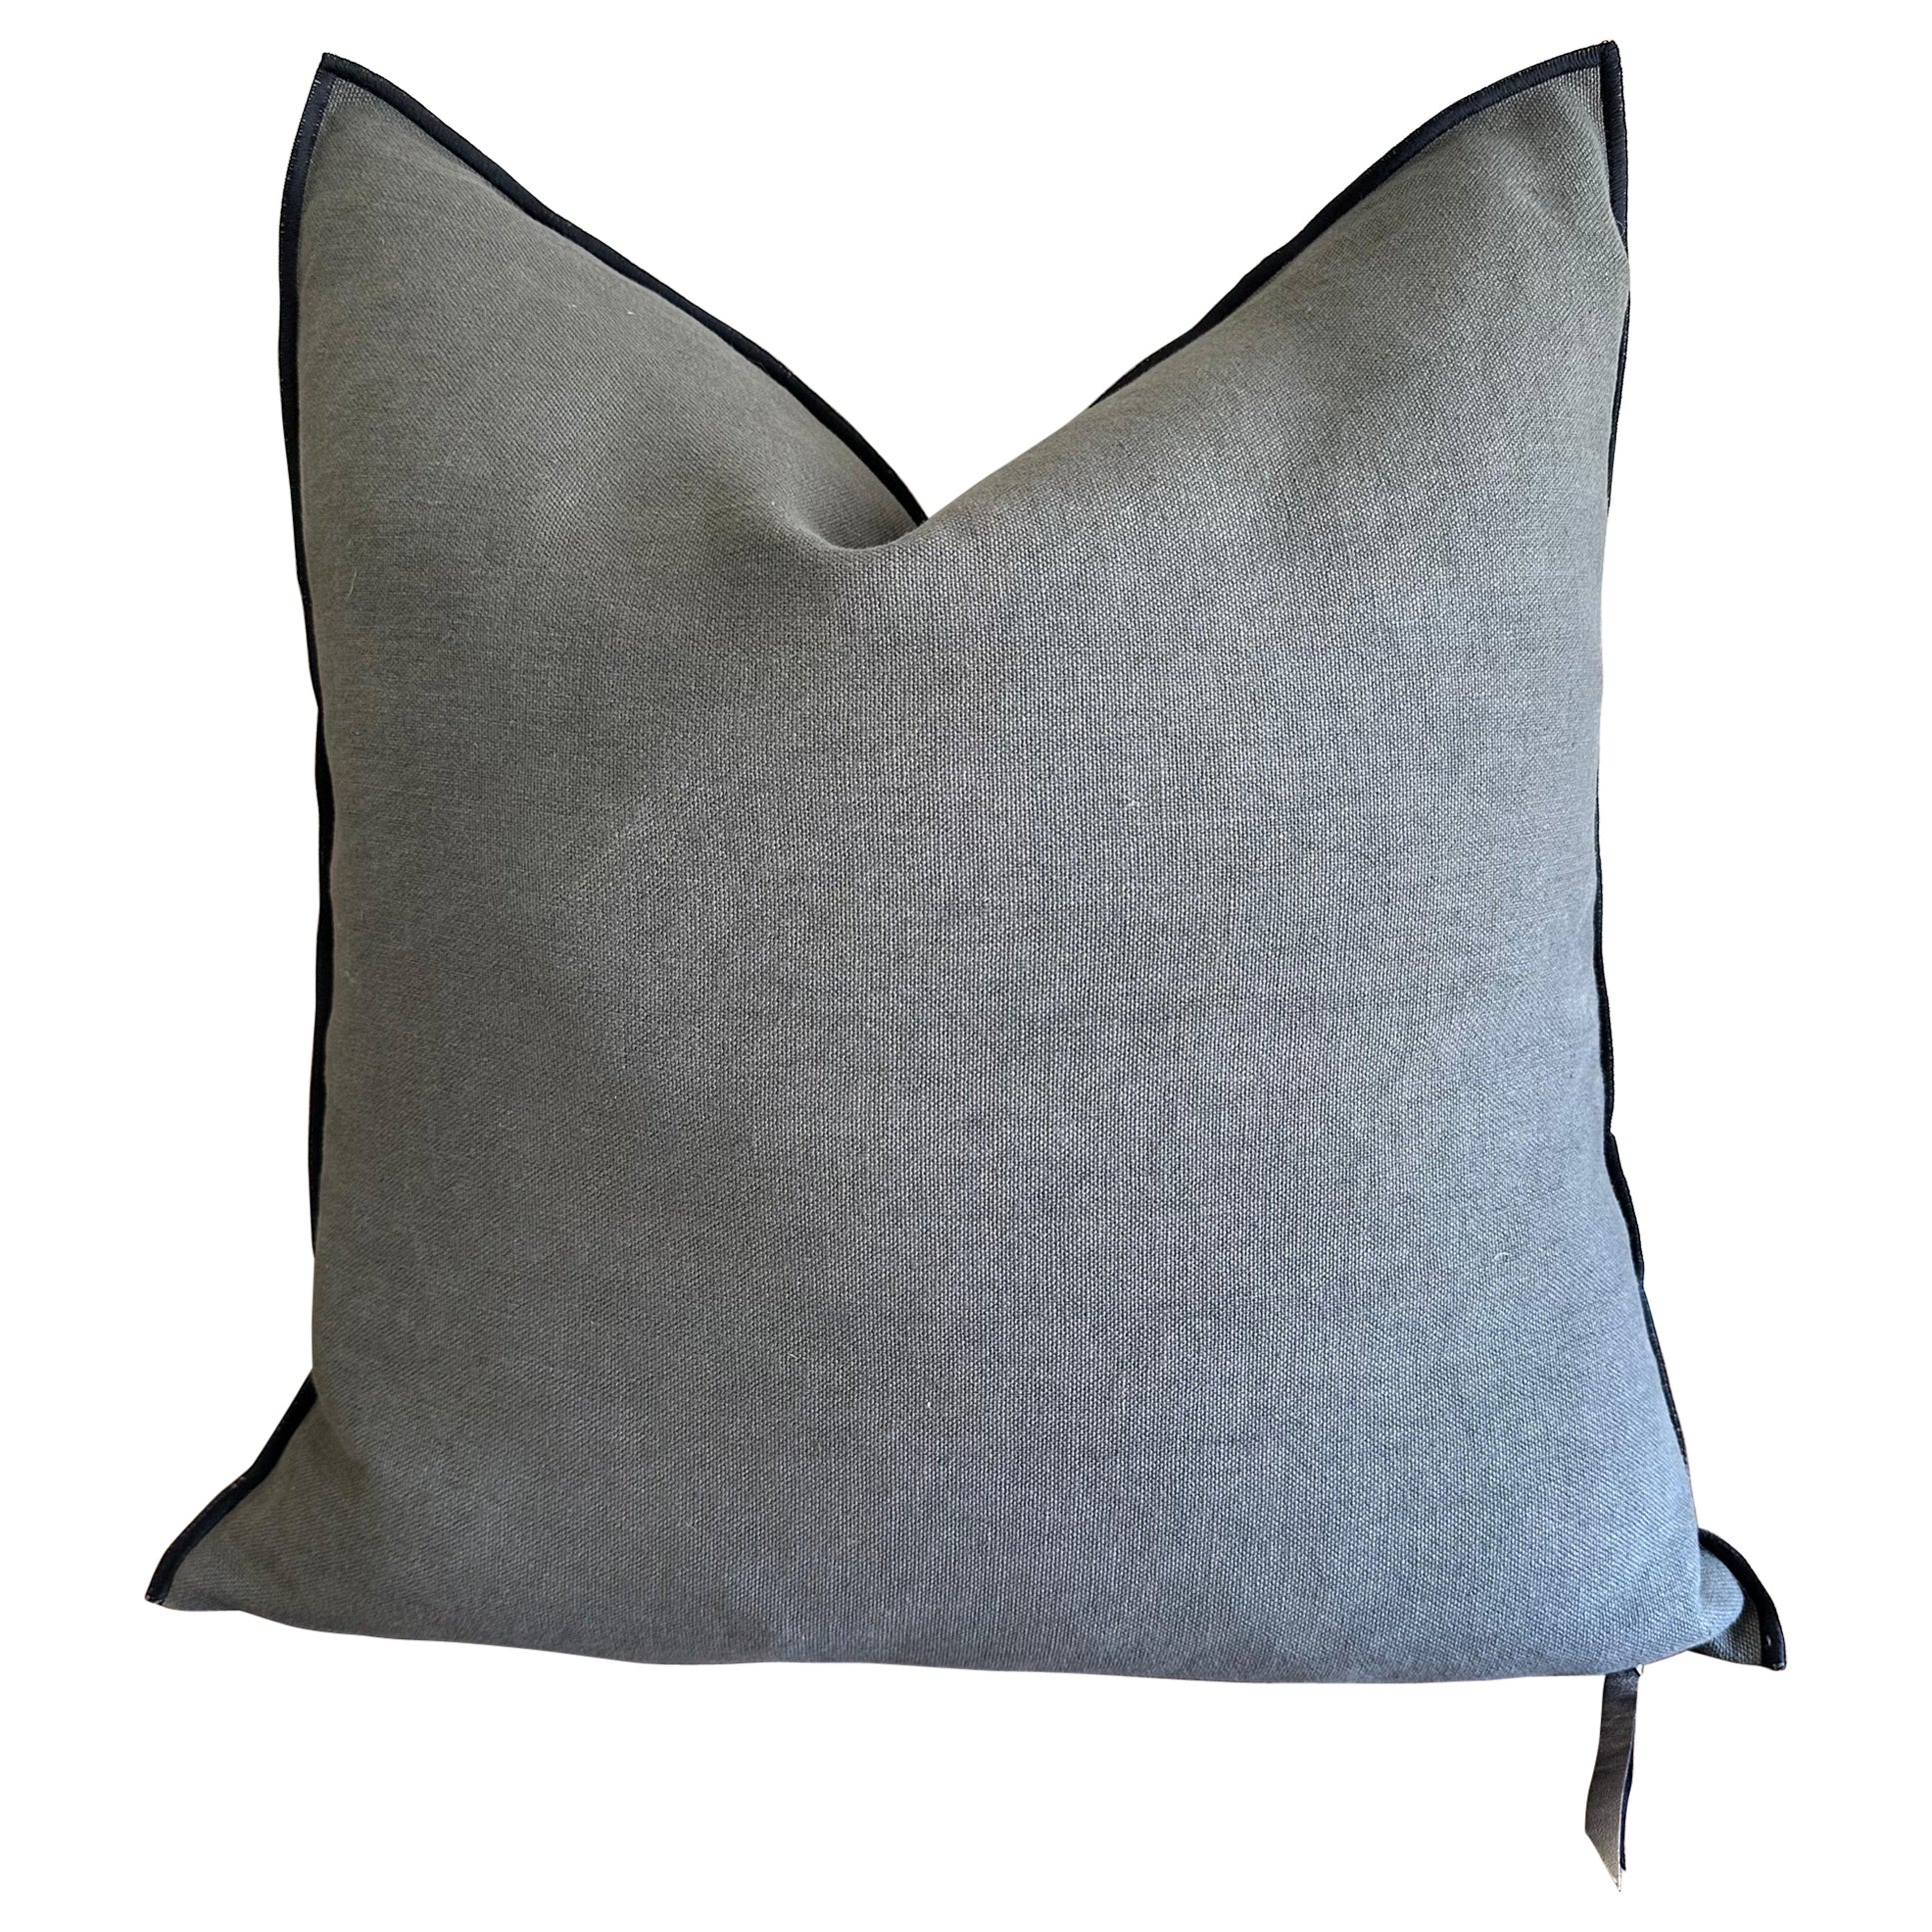 Stone Washed French Linen Accent Pillow in Crocodile